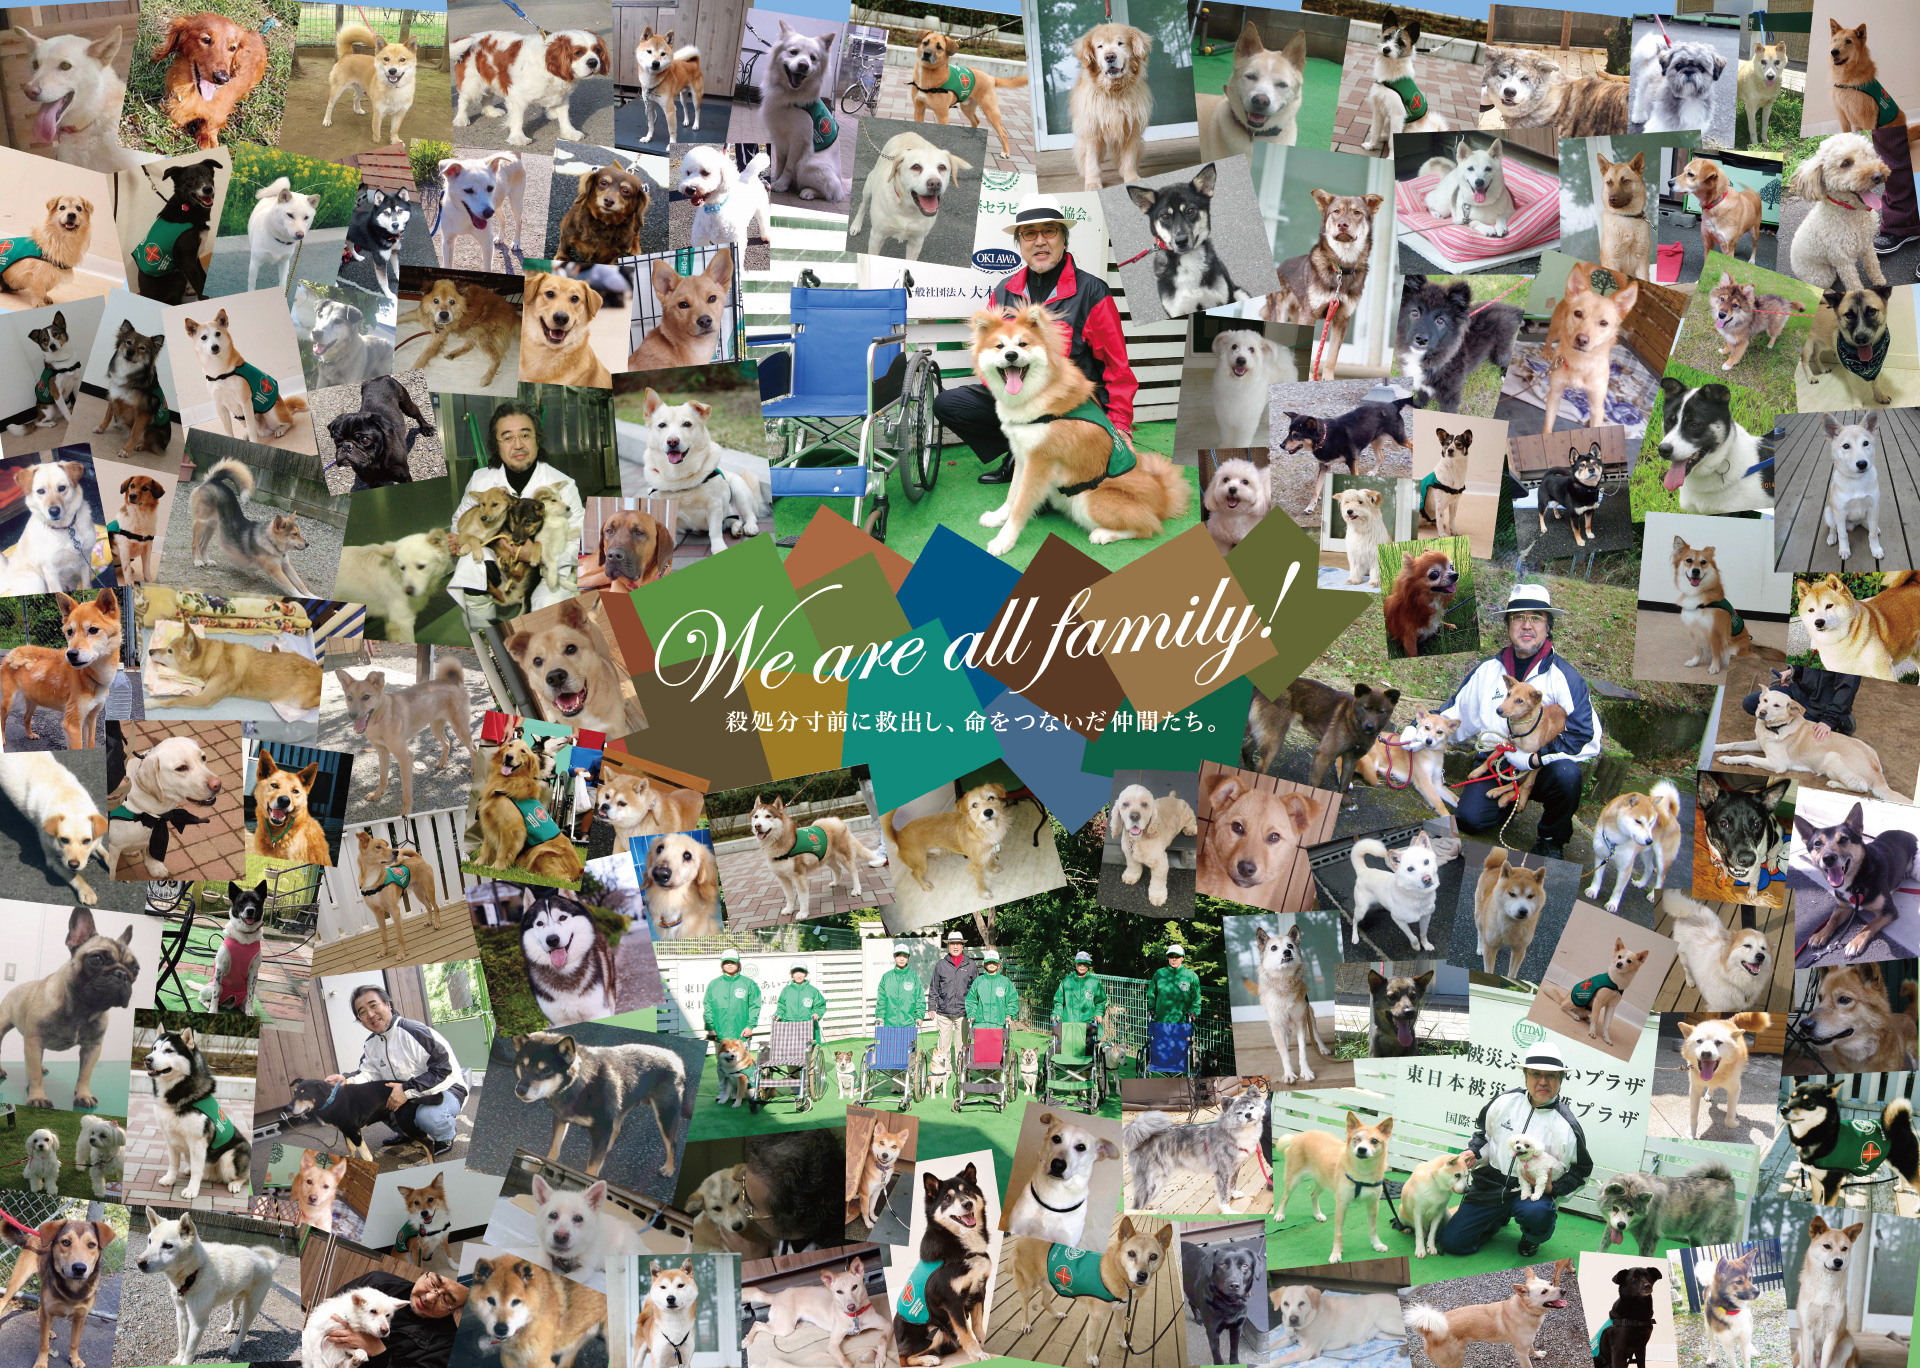 We are all family!